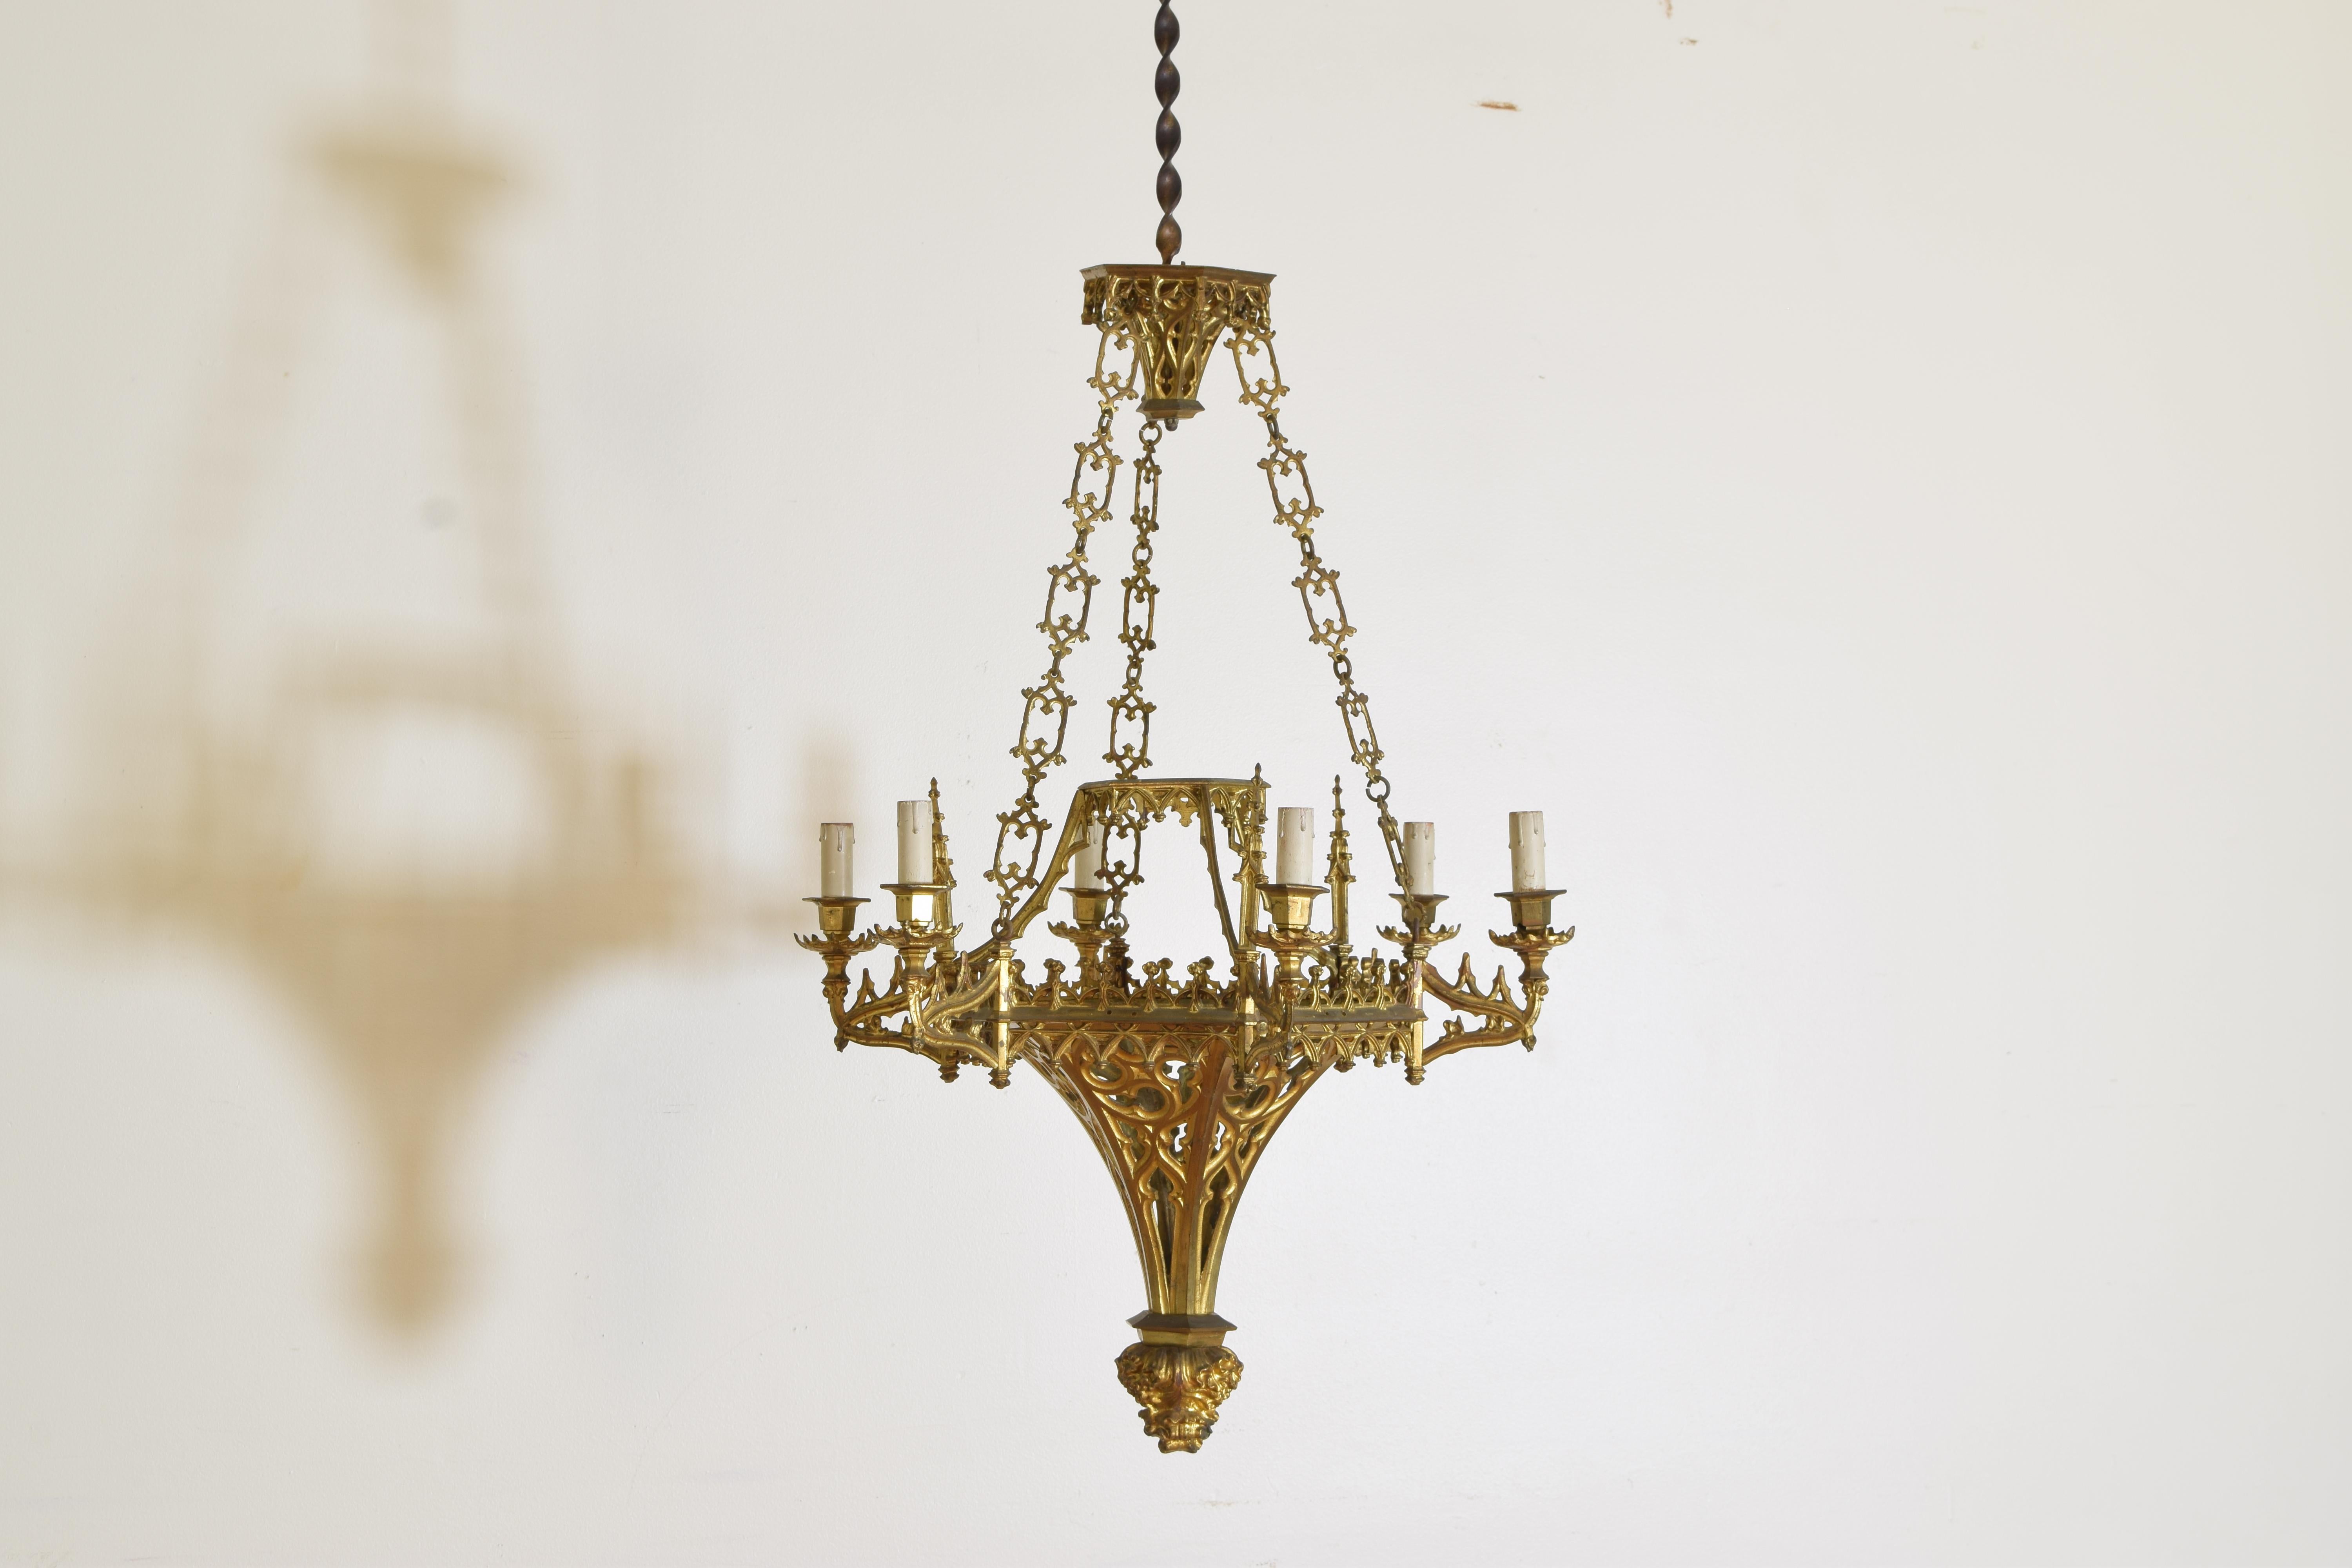 Of the gothic revival period, this circa 1865 chandelier hangs from an ornate canopy, the body constructed of gothic arches and spires and issuing six arms.